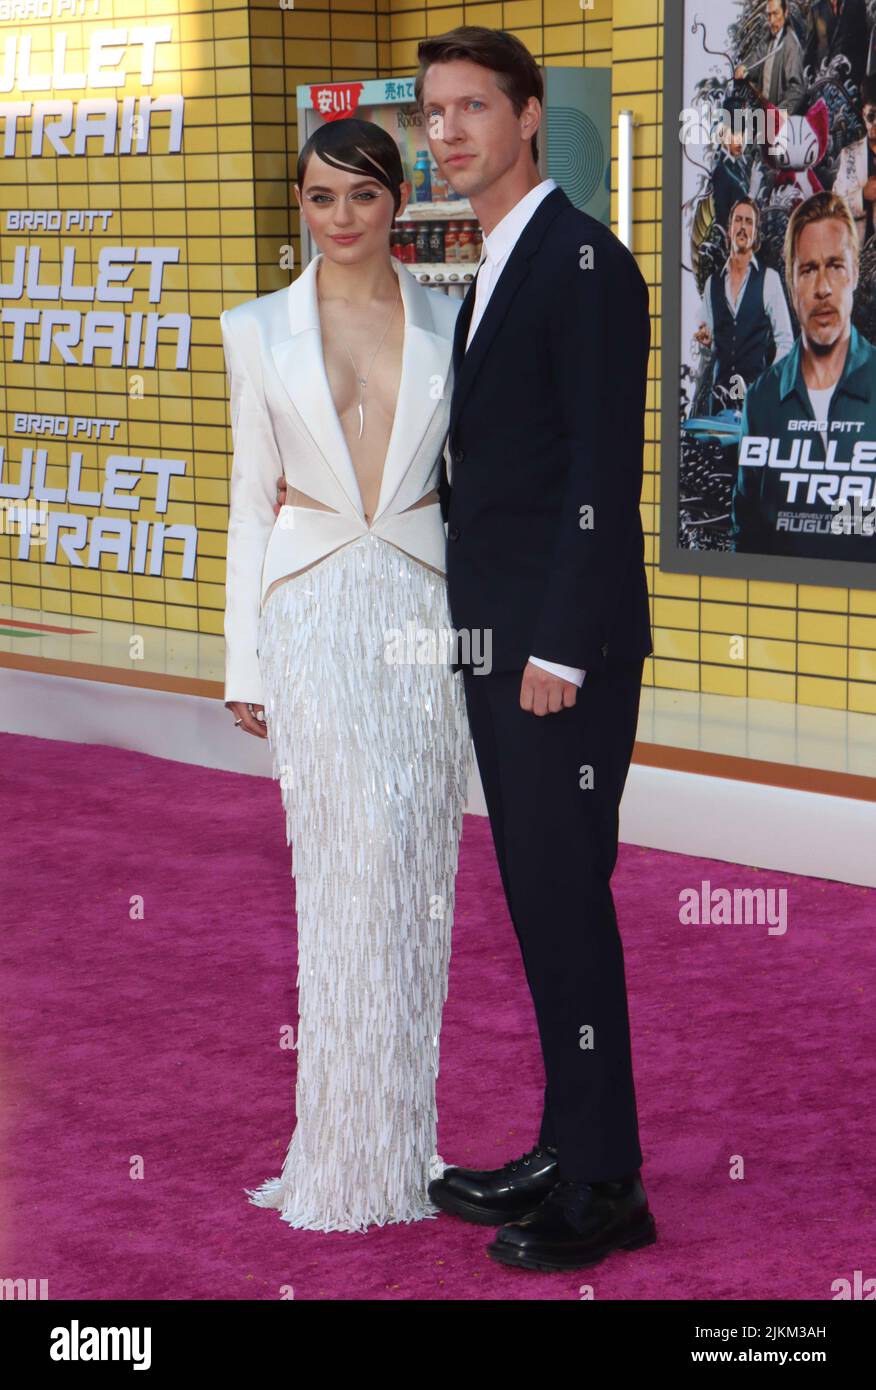 Los Angeles, USA. 02nd Aug, 2022. Joey King, Steven Piet 08/01/2022 The Los Angeles Premiere of Bullet Train at the Regency Village Theatre and Regency Bruin Theatre in Los Angeles, CA Photo by Izumi Hasegawa/HollywoodNewsWire.net Credit: Hollywood News Wire Inc./Alamy Live News Stock Photo